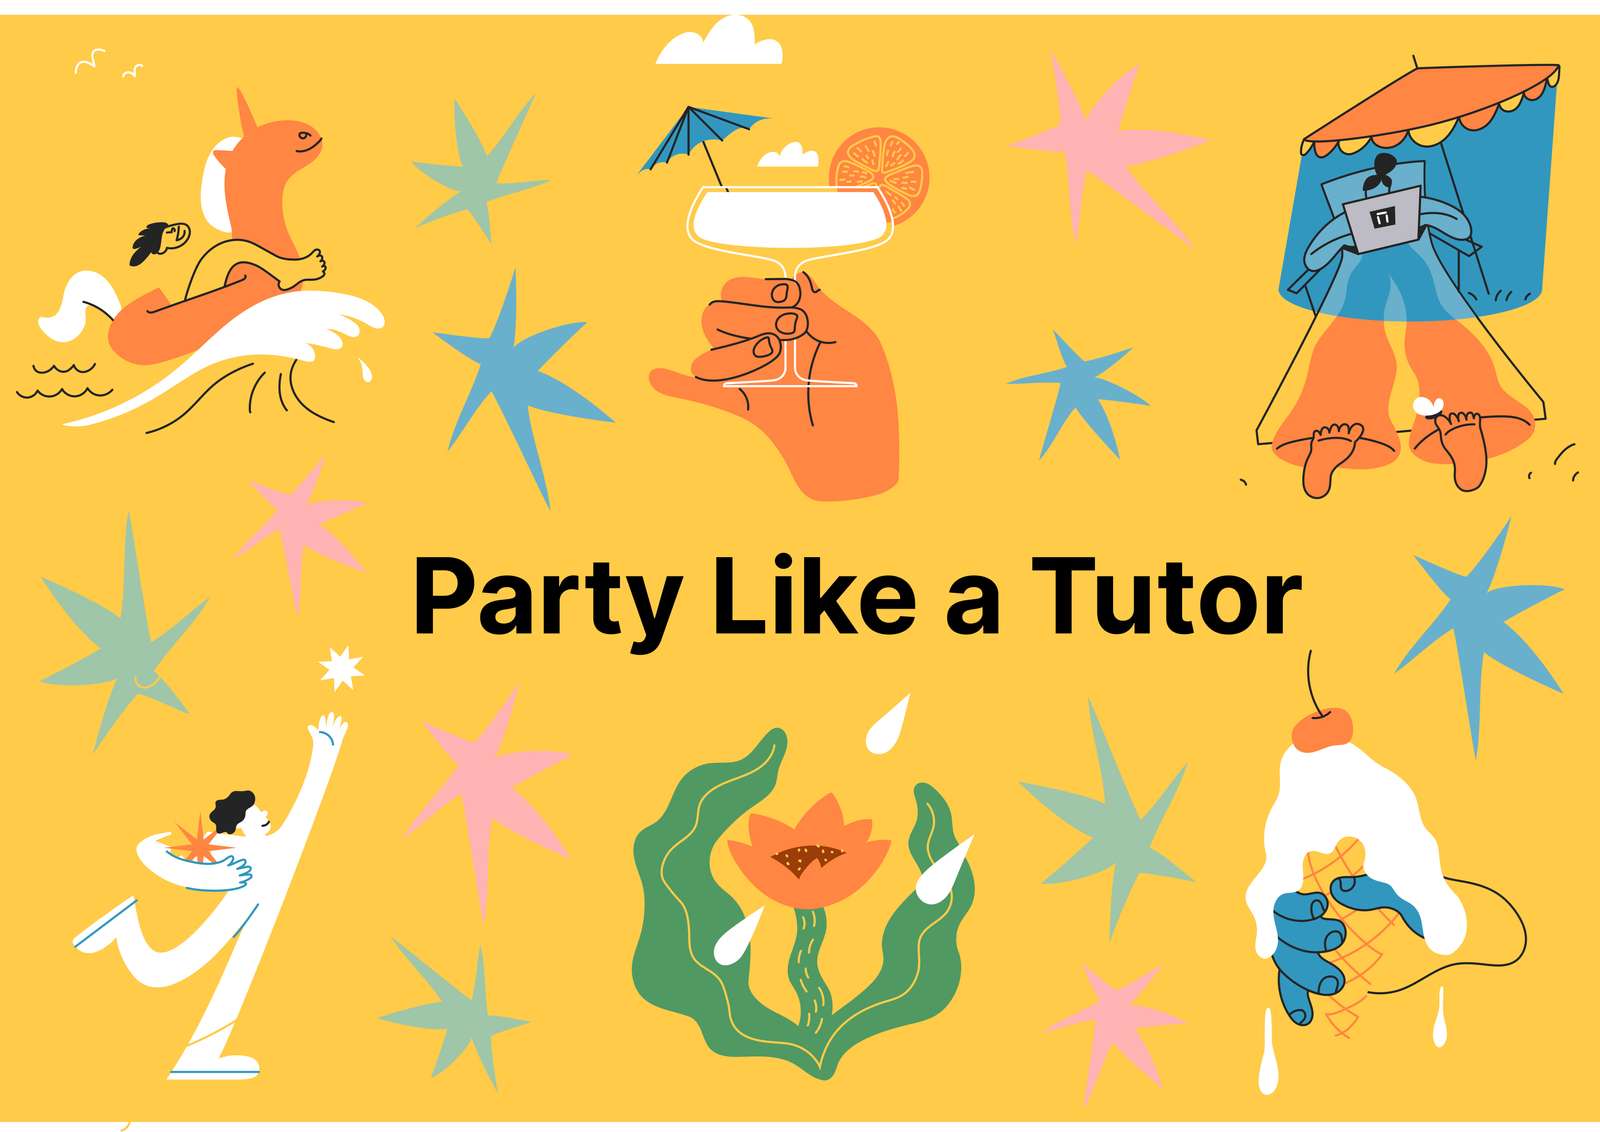 Party Like a Tutor 2 puzzle online from photo